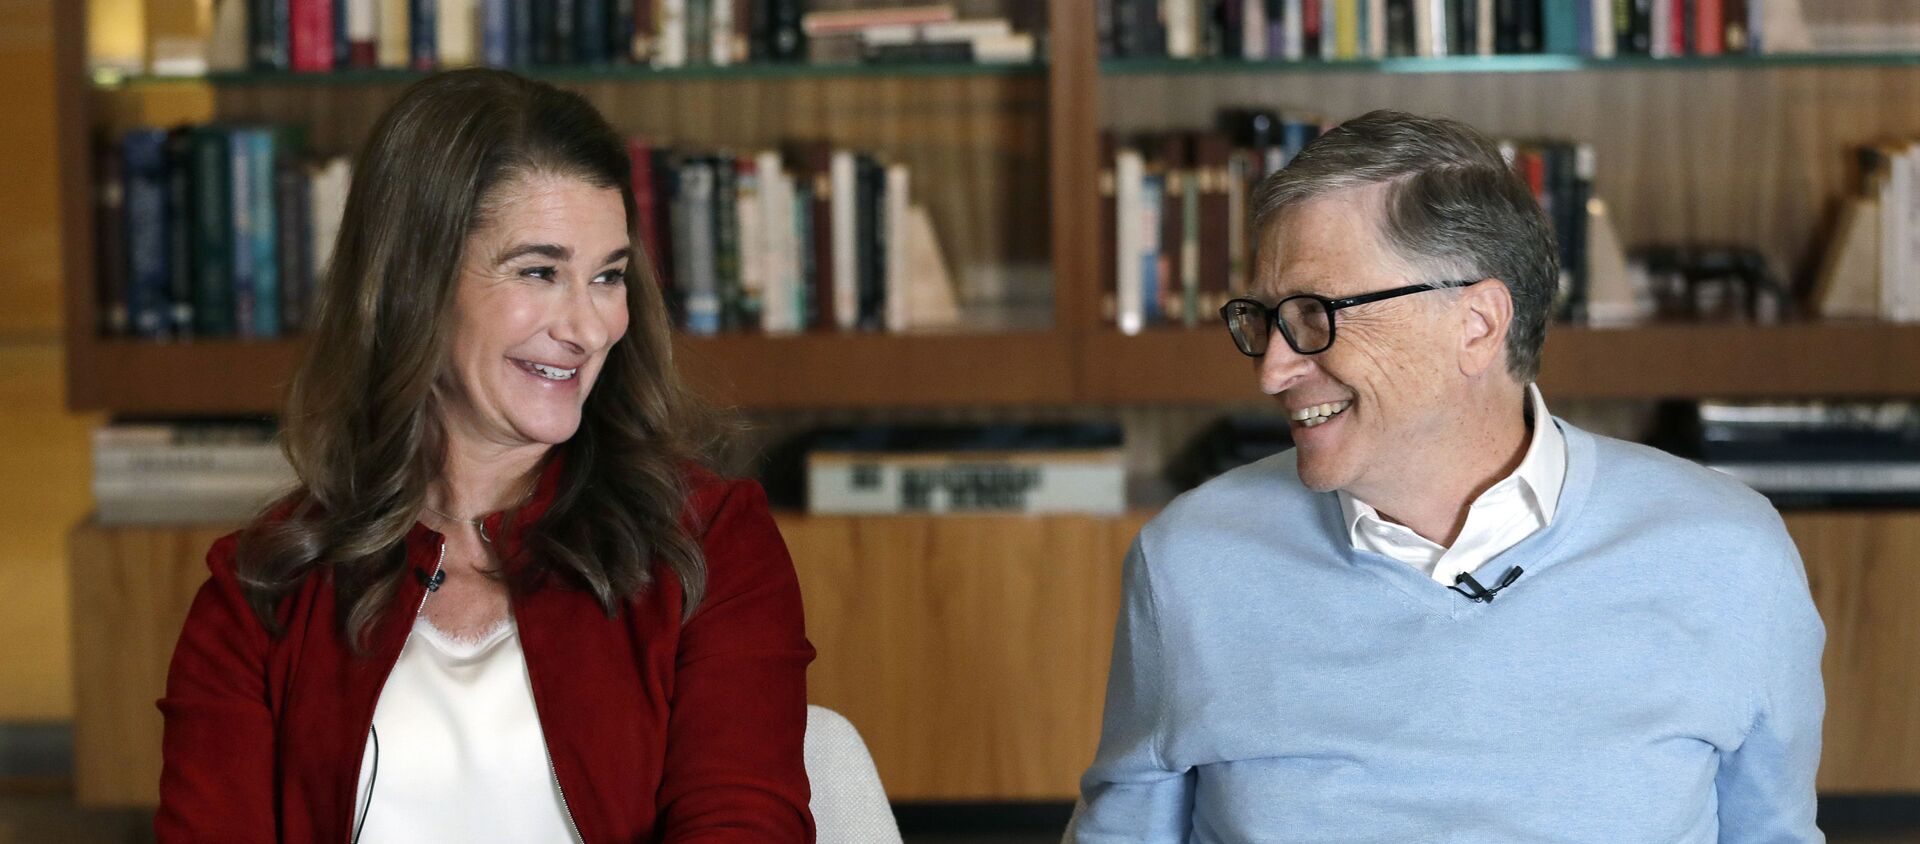 In this Feb. 1, 2019, Bill and Melinda Gates look toward each other and smile while being interviewed in Kirkland, Wash. The couple, whose foundation has the largest endowment in the world, are pushing back against a new wave of criticism about whether billionaire philanthropy is a force for good - Sputnik International, 1920, 04.05.2021